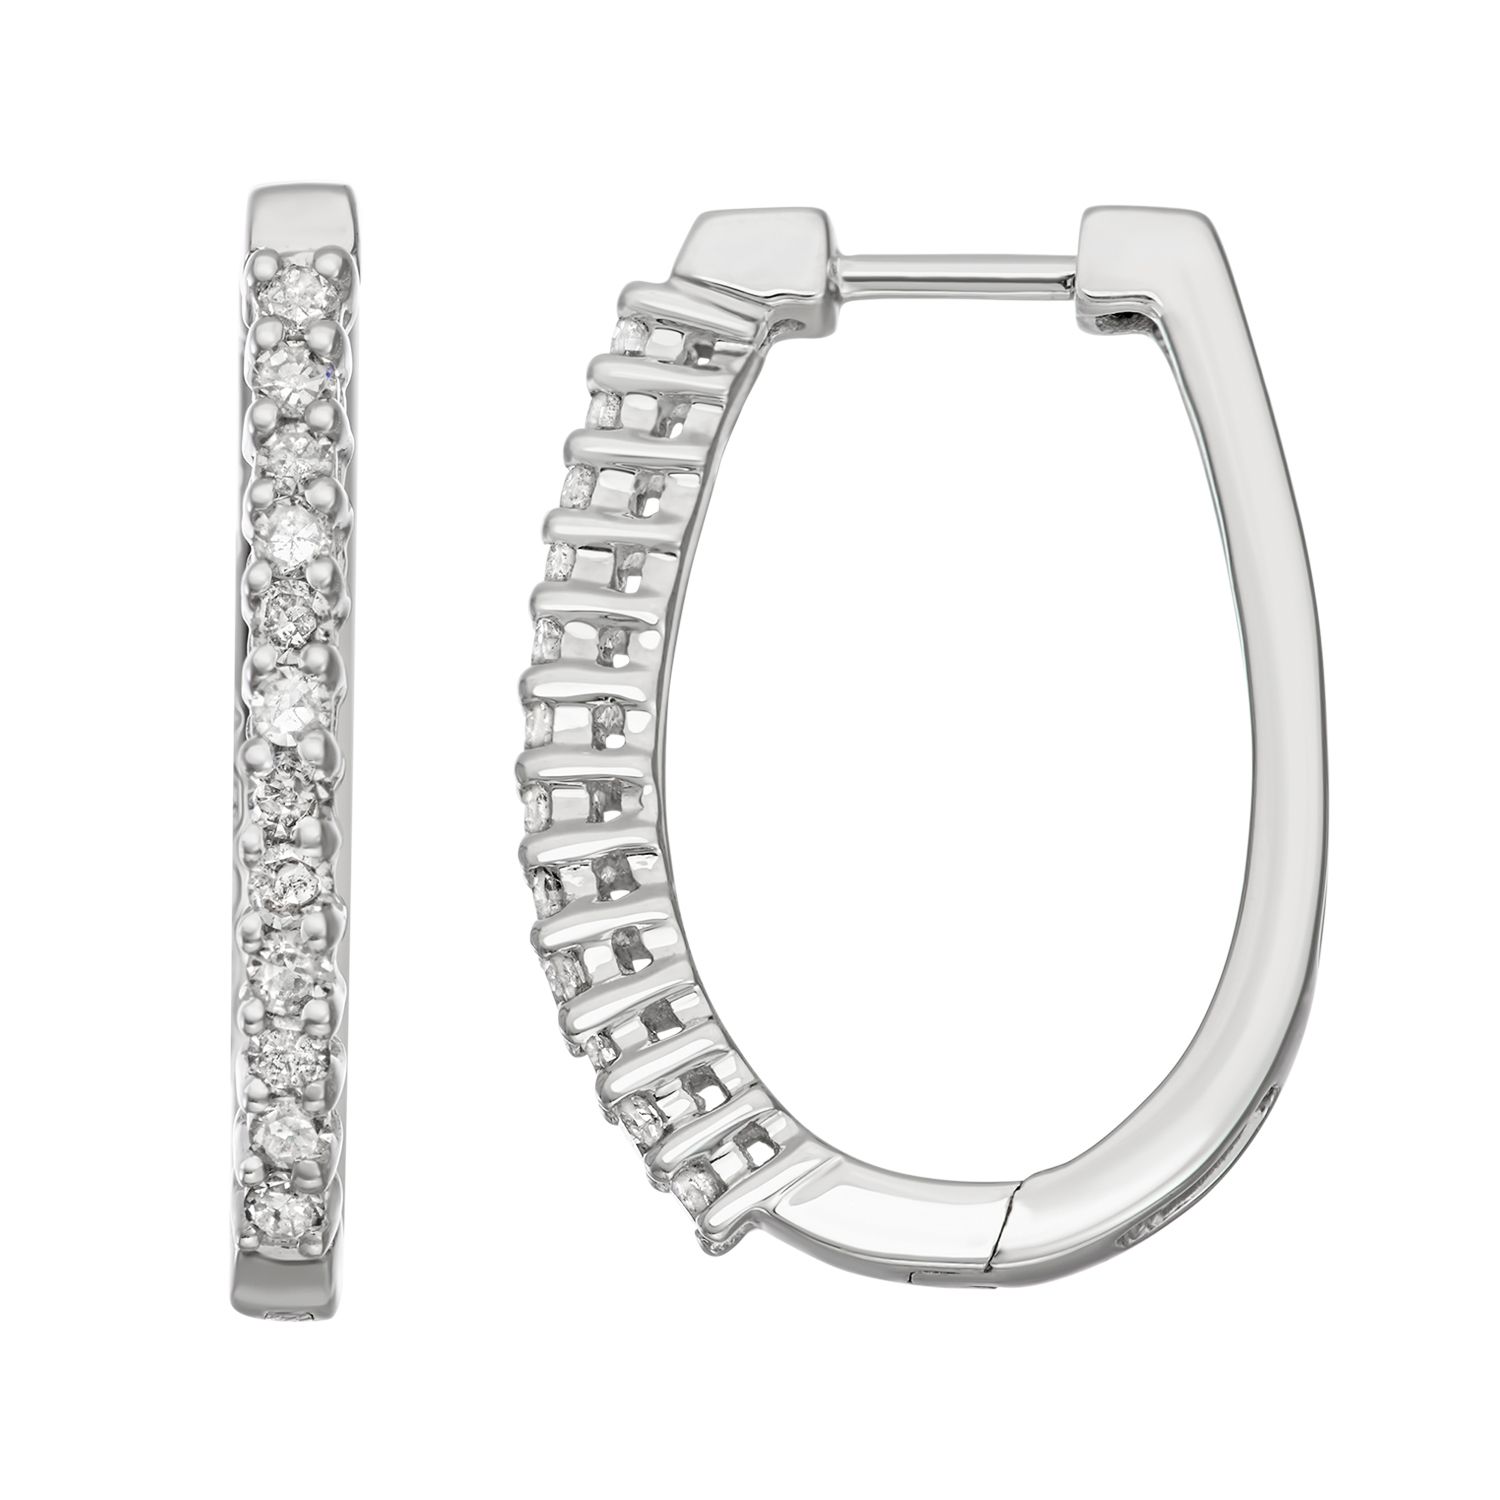 Image for HDI 10k White Gold 1/2 Carat T.W. Diamond Oval Hoop Earrings at Kohl's.